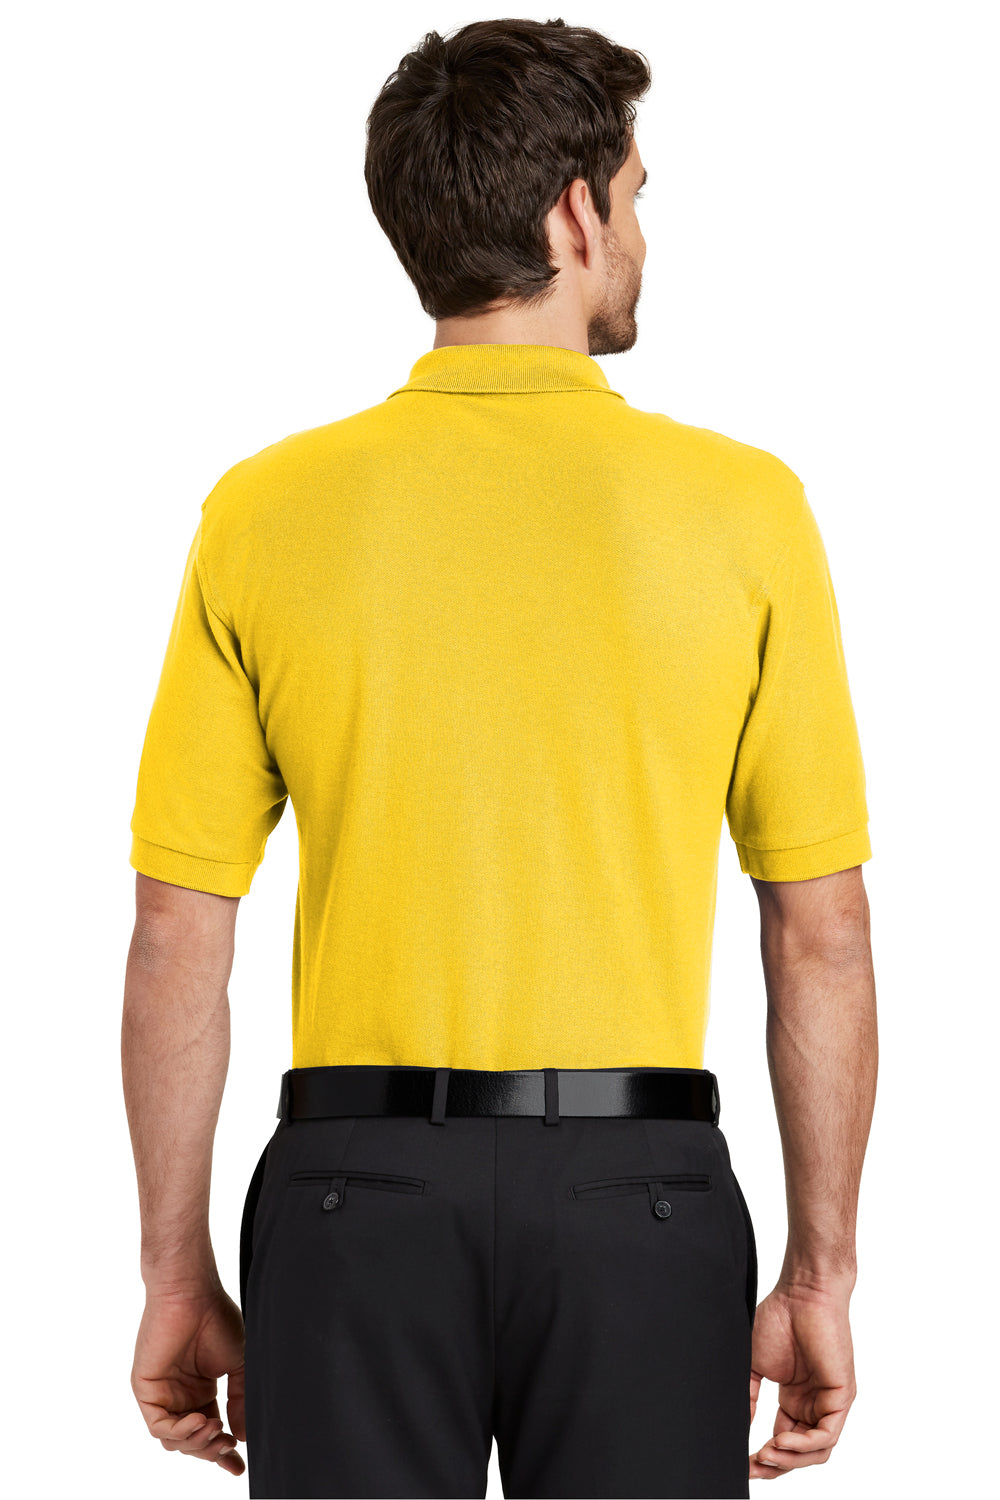 Port Authority K500 Mens Silk Touch Wrinkle Resistant Short Sleeve Polo Shirt Sunflower Yellow Back